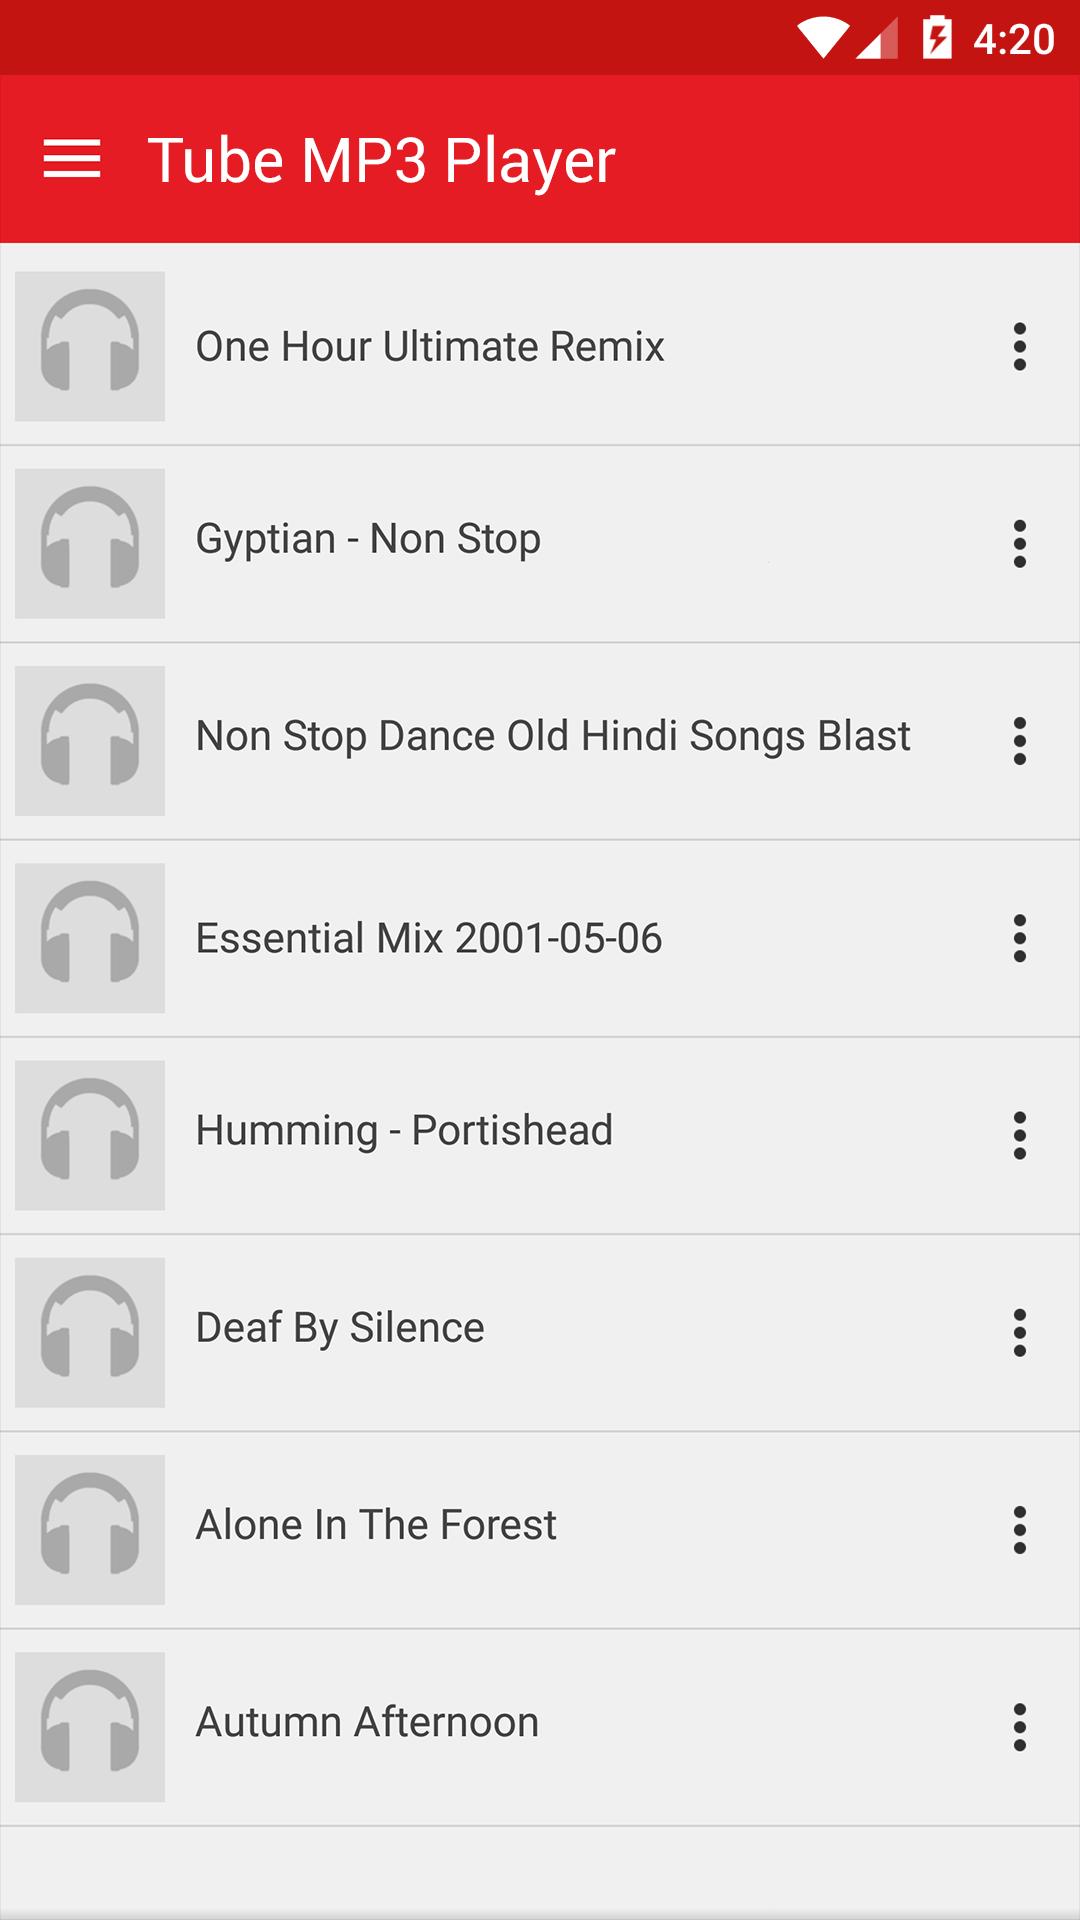 Tube MP3 Music Player for Android - APK Download